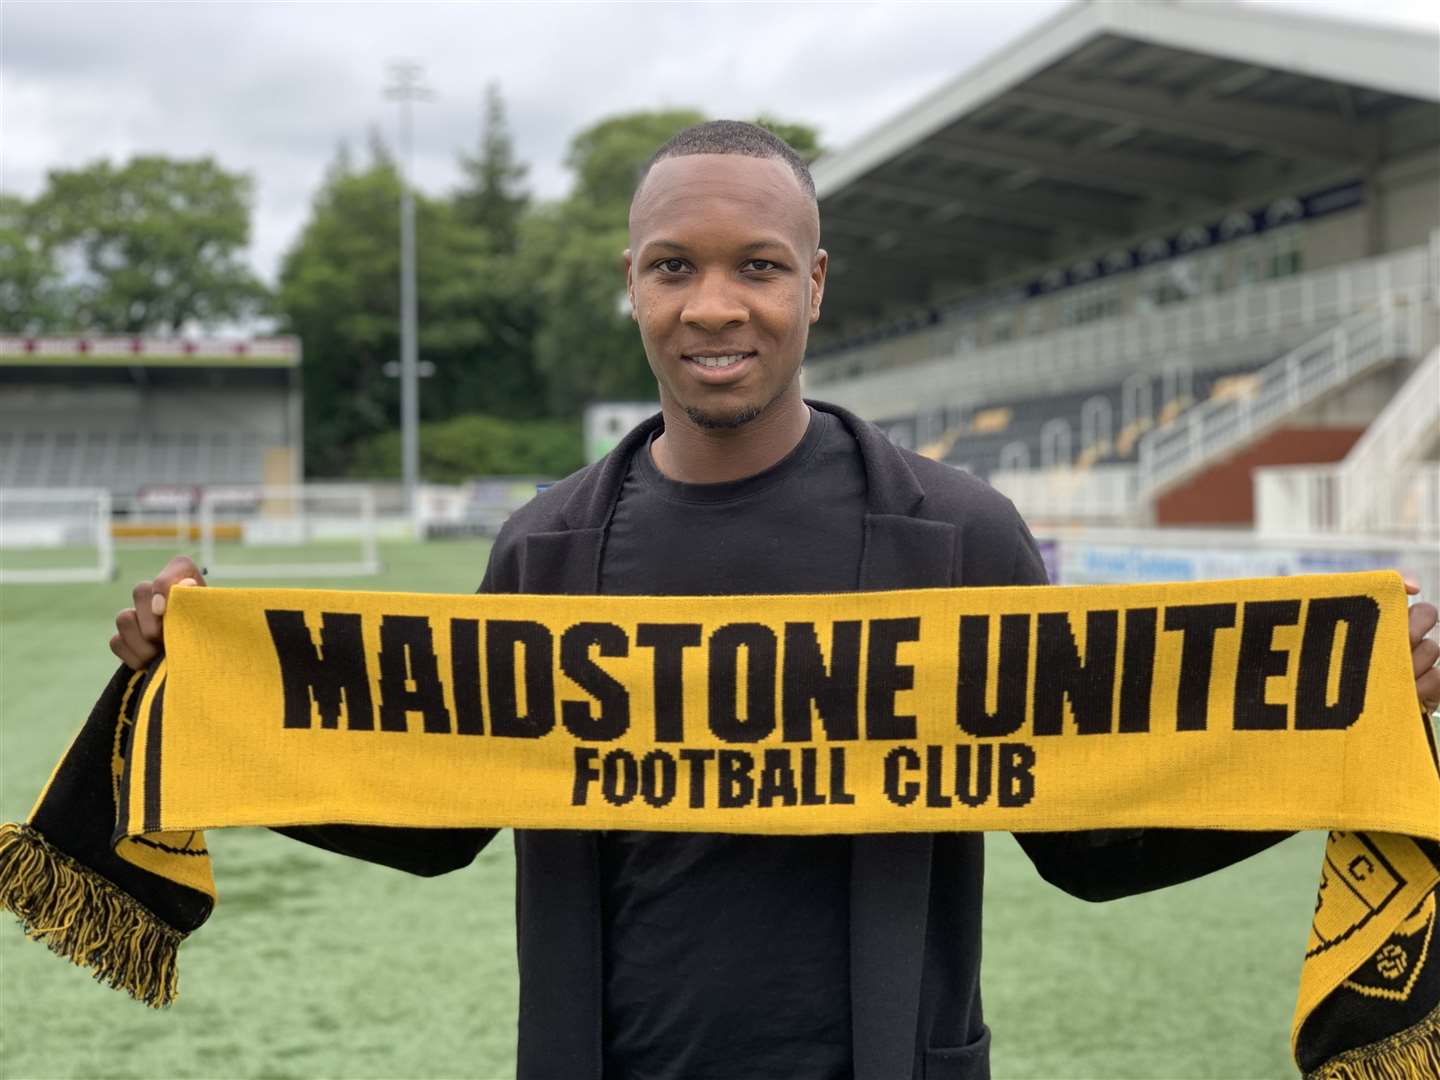 Gavin Hoyte has signed a one-year deal at Maidstone